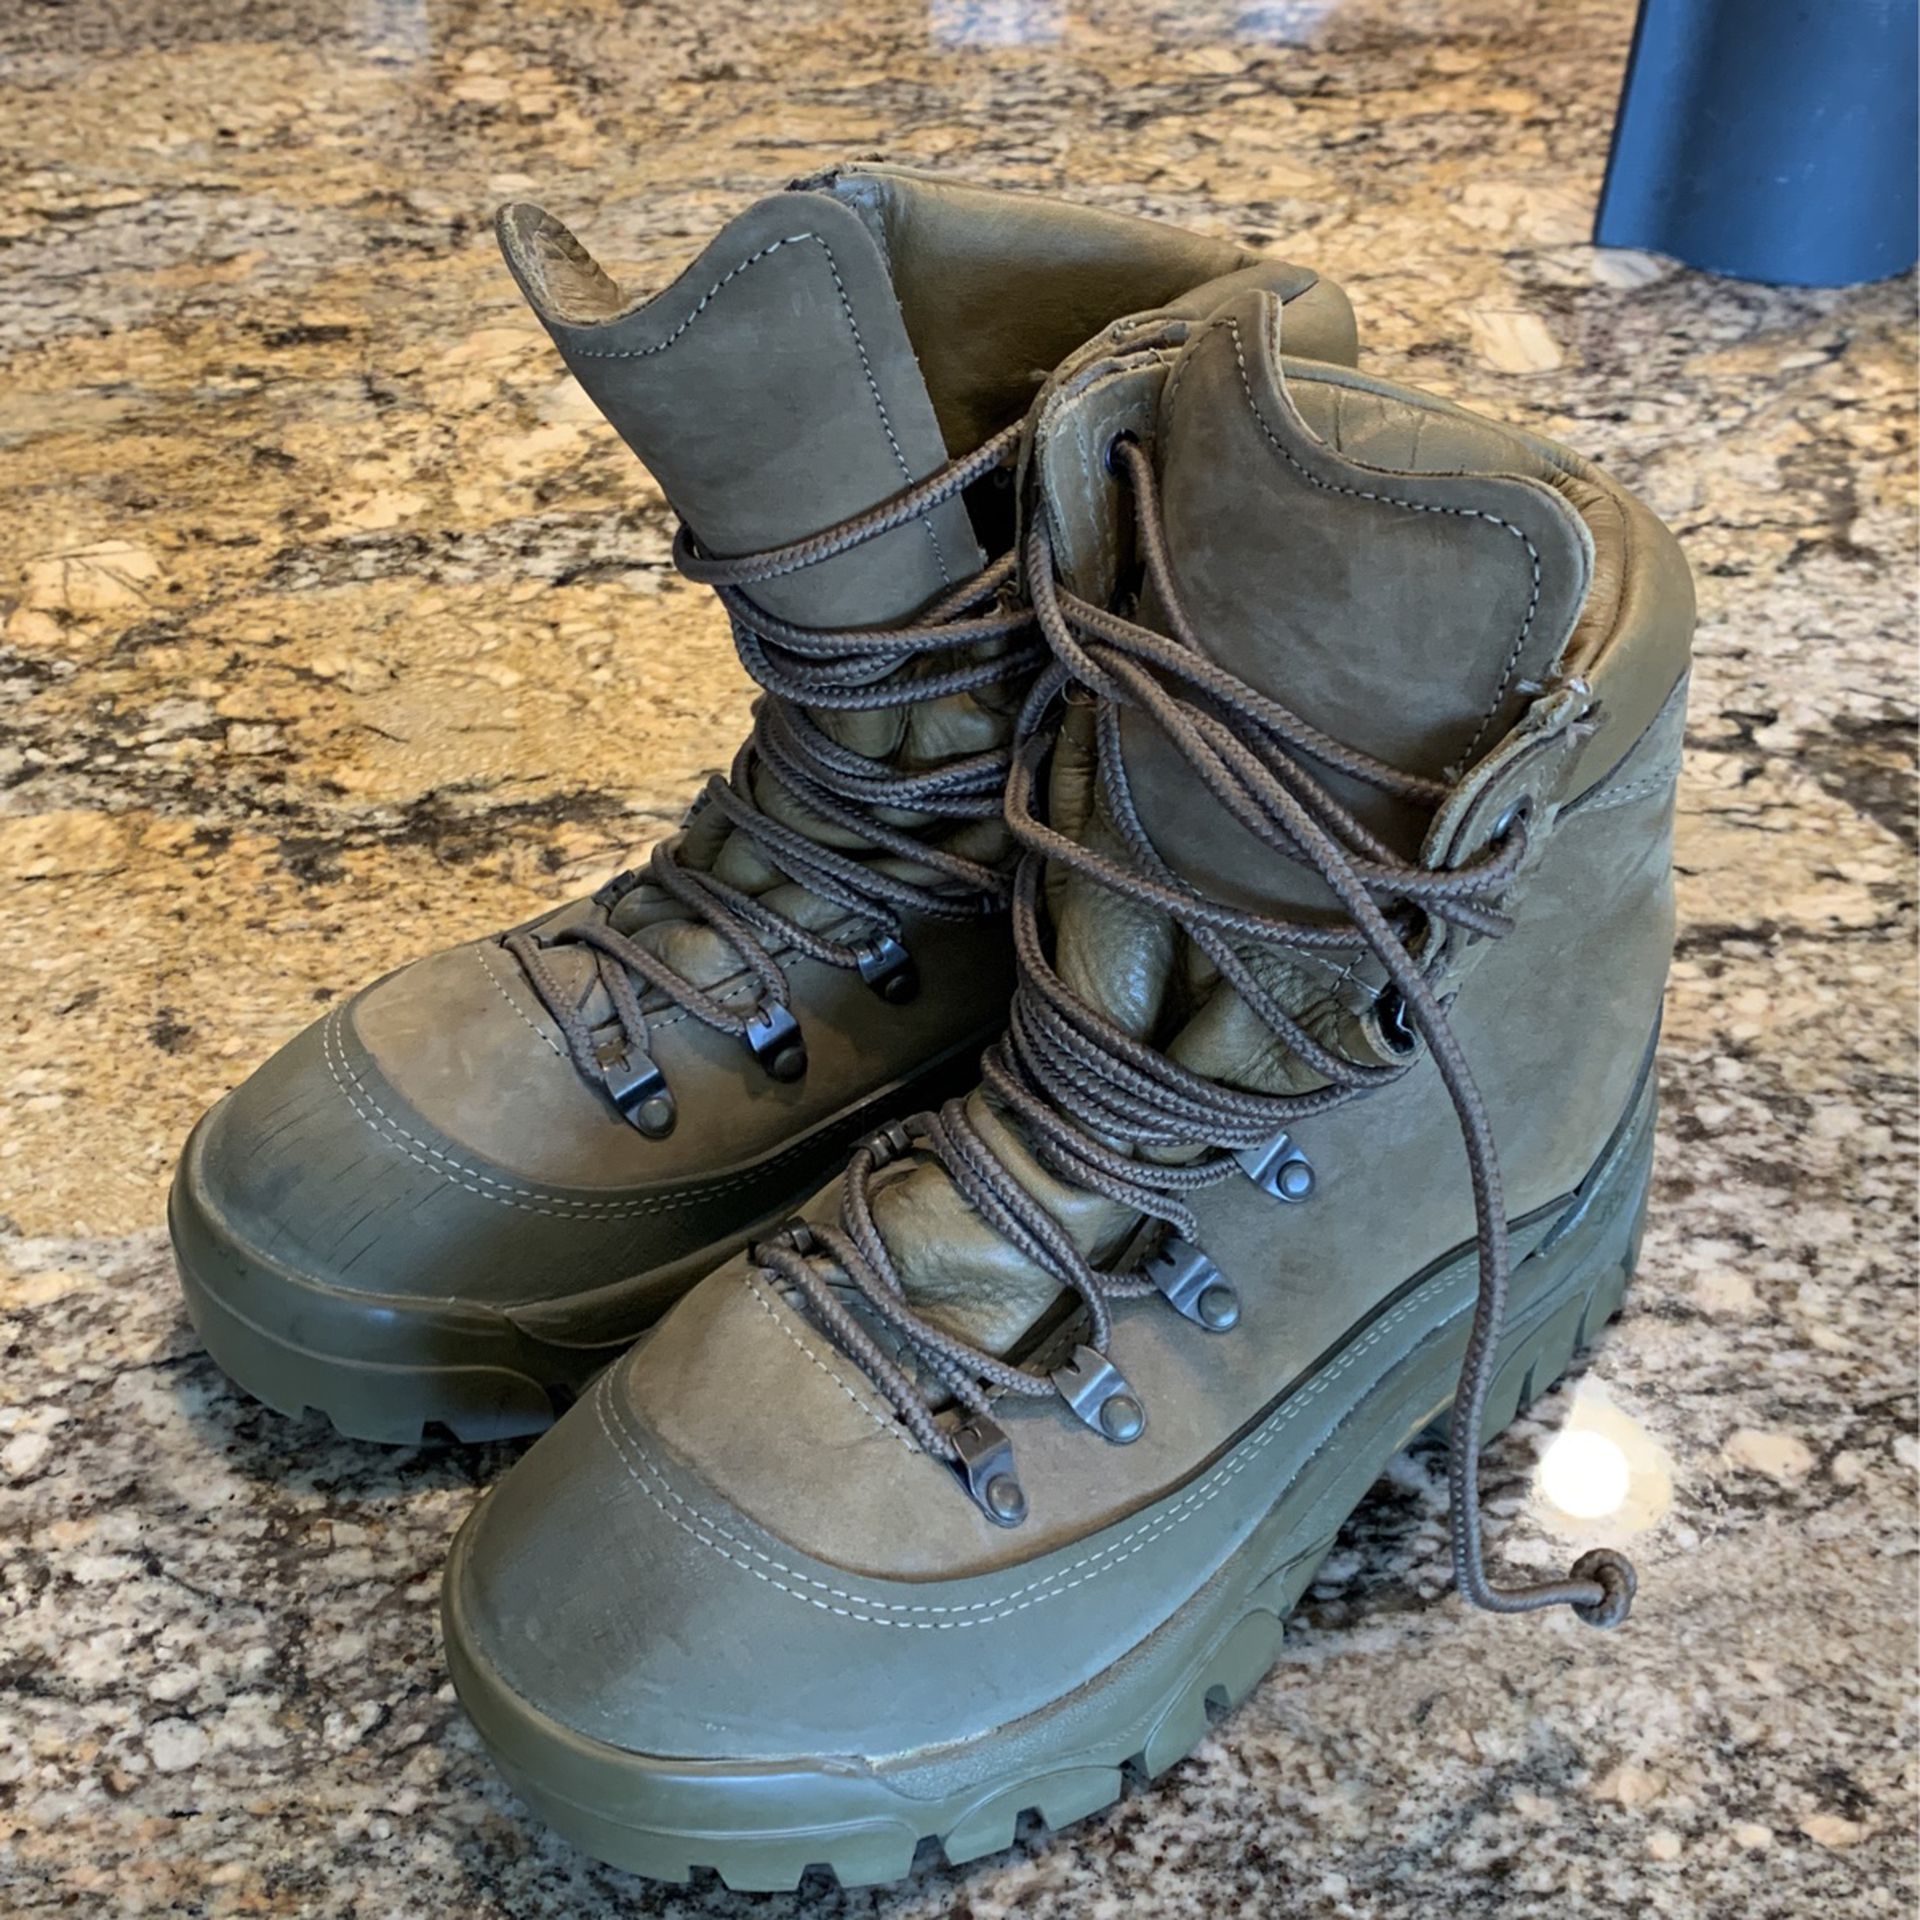 NWT Belleville MCB 950 Gore-Tex Military Mountain Boots Water Proof Cold Weather